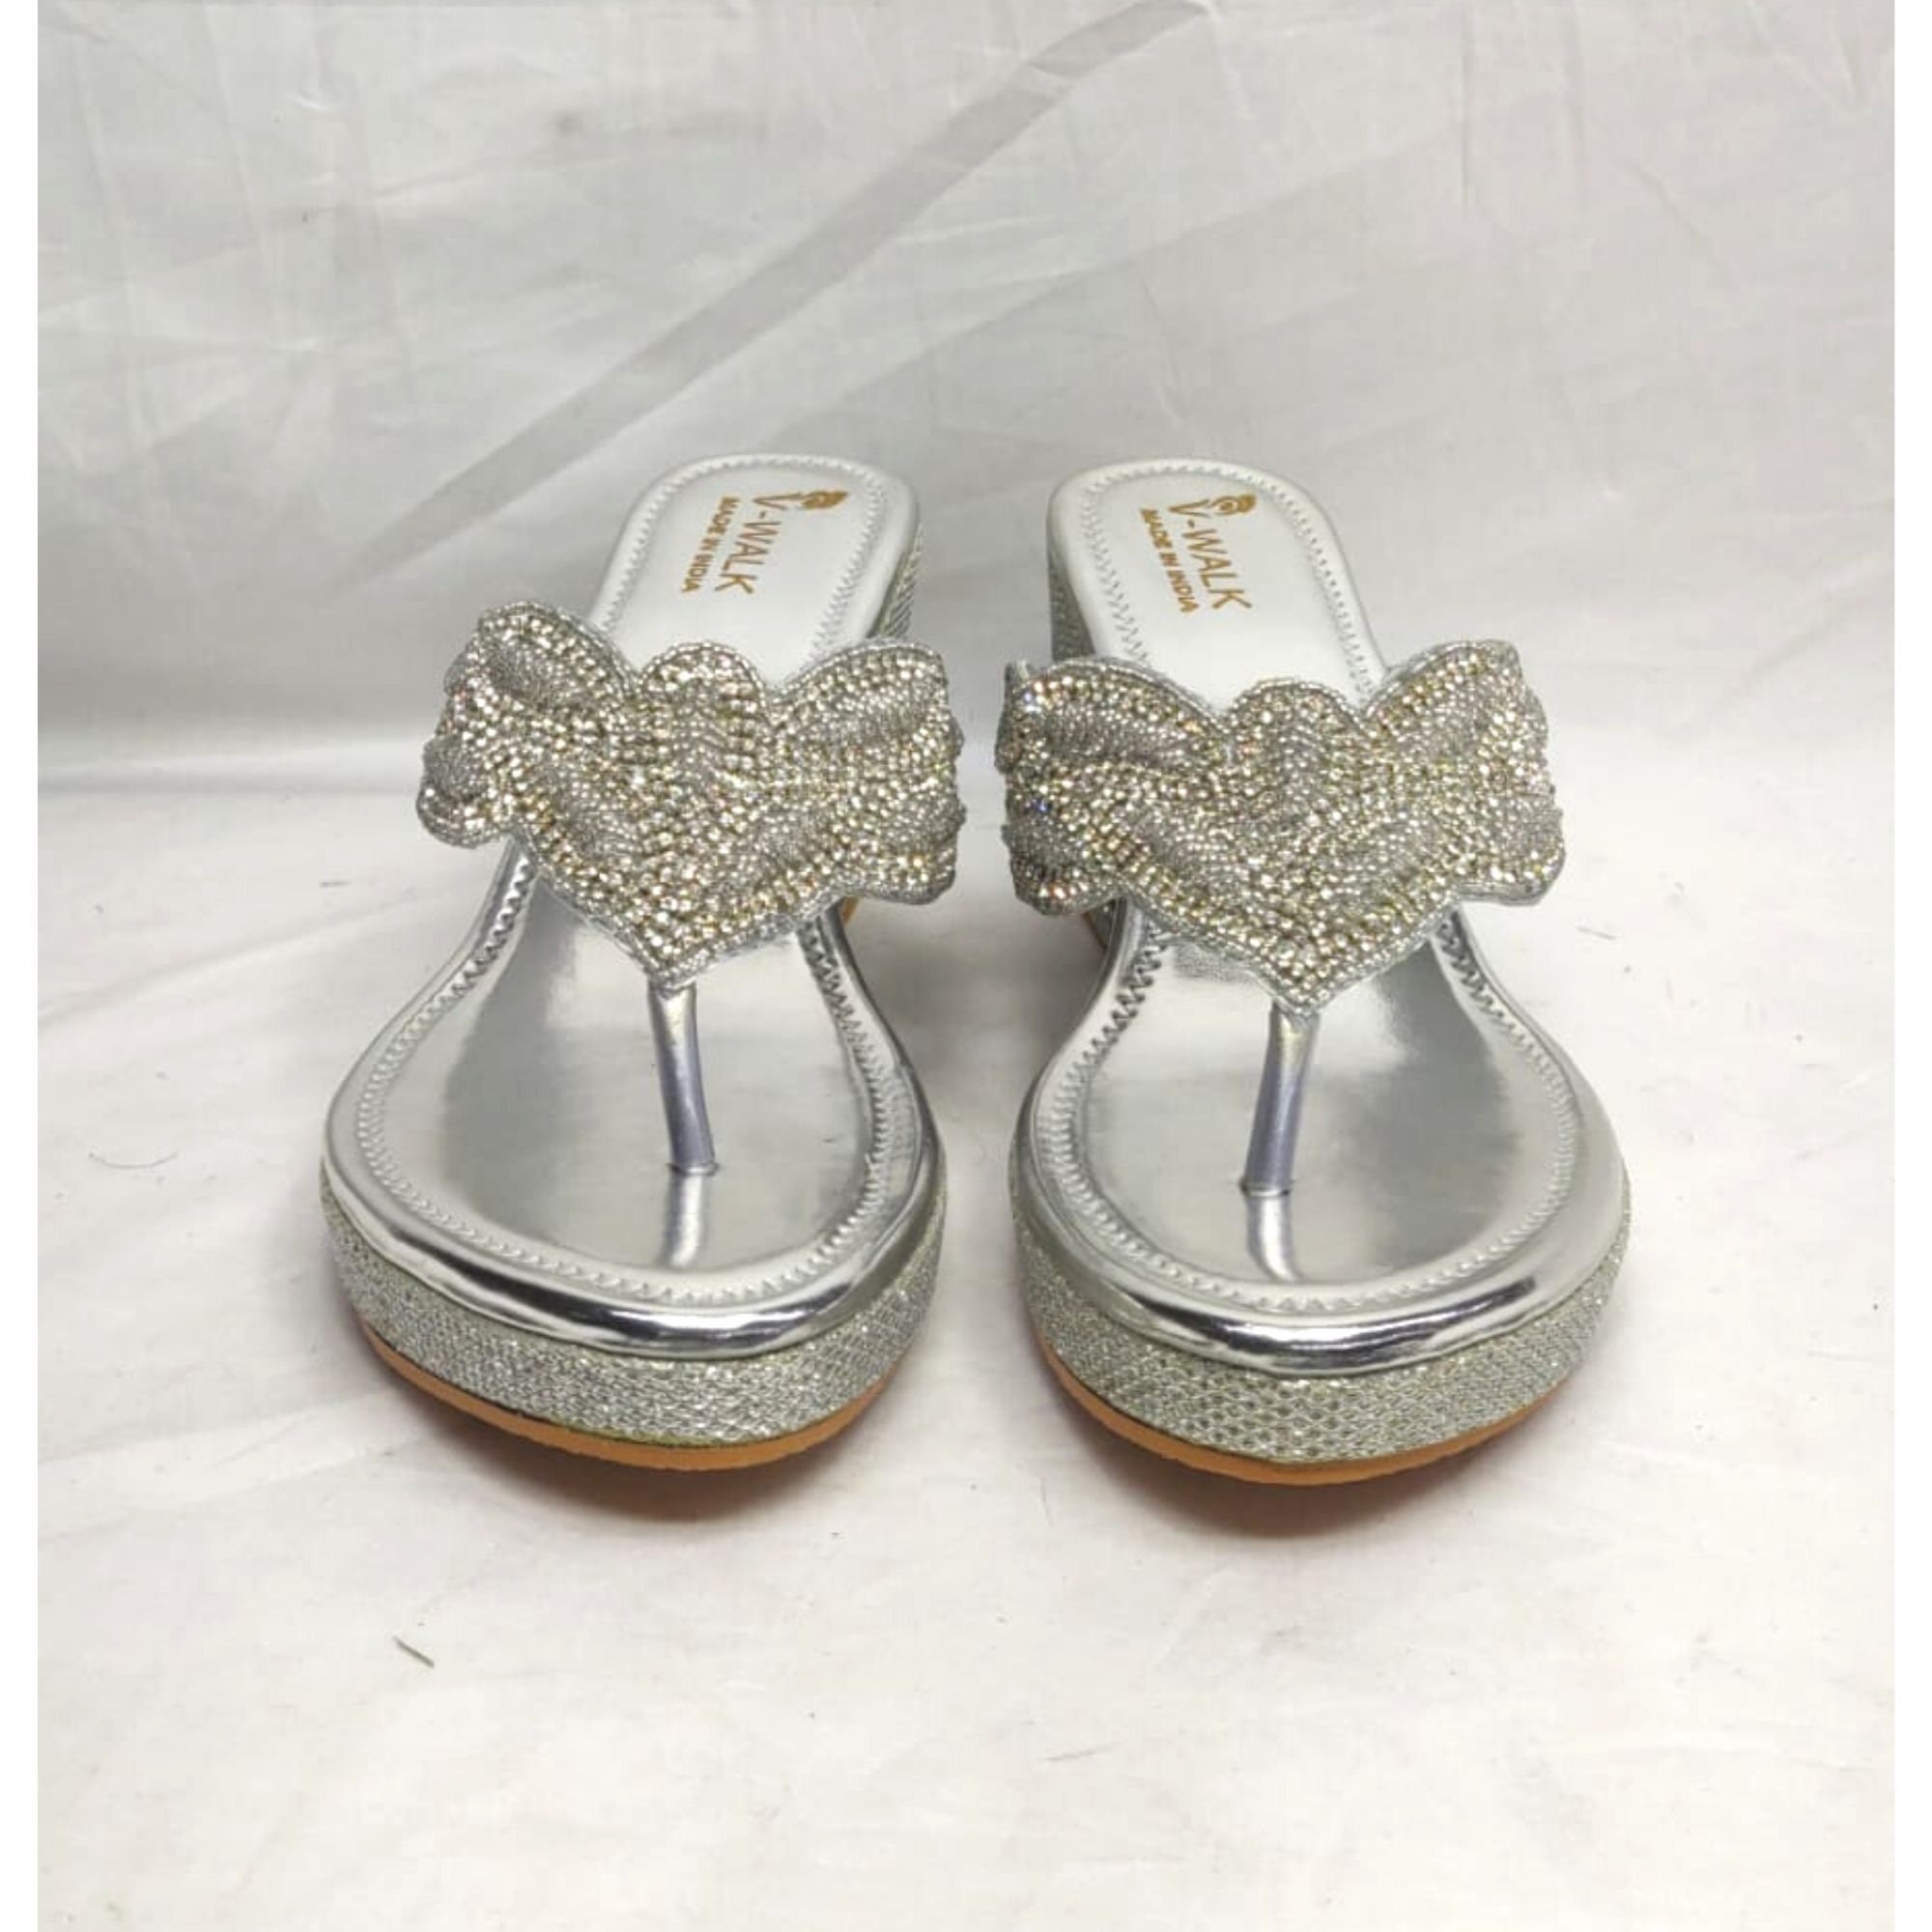 Bridal Shoes in Silver Bridal Wedges Indian Women's - Etsy